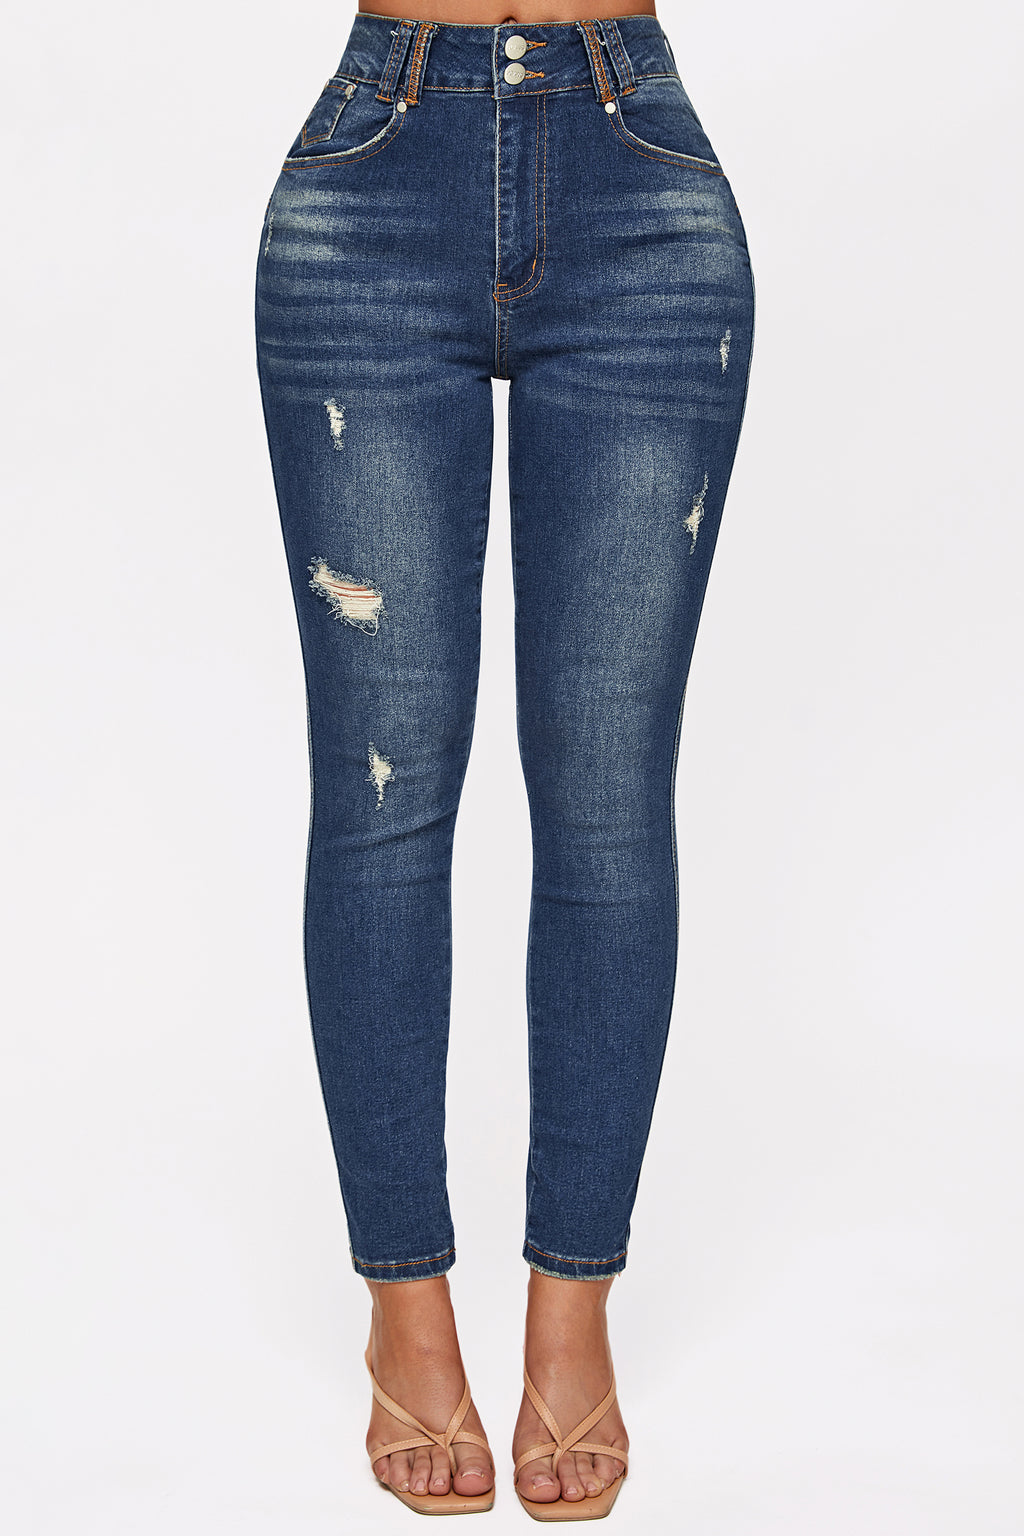 Ripped Button Fly Pocket Detail Skinny Jeans